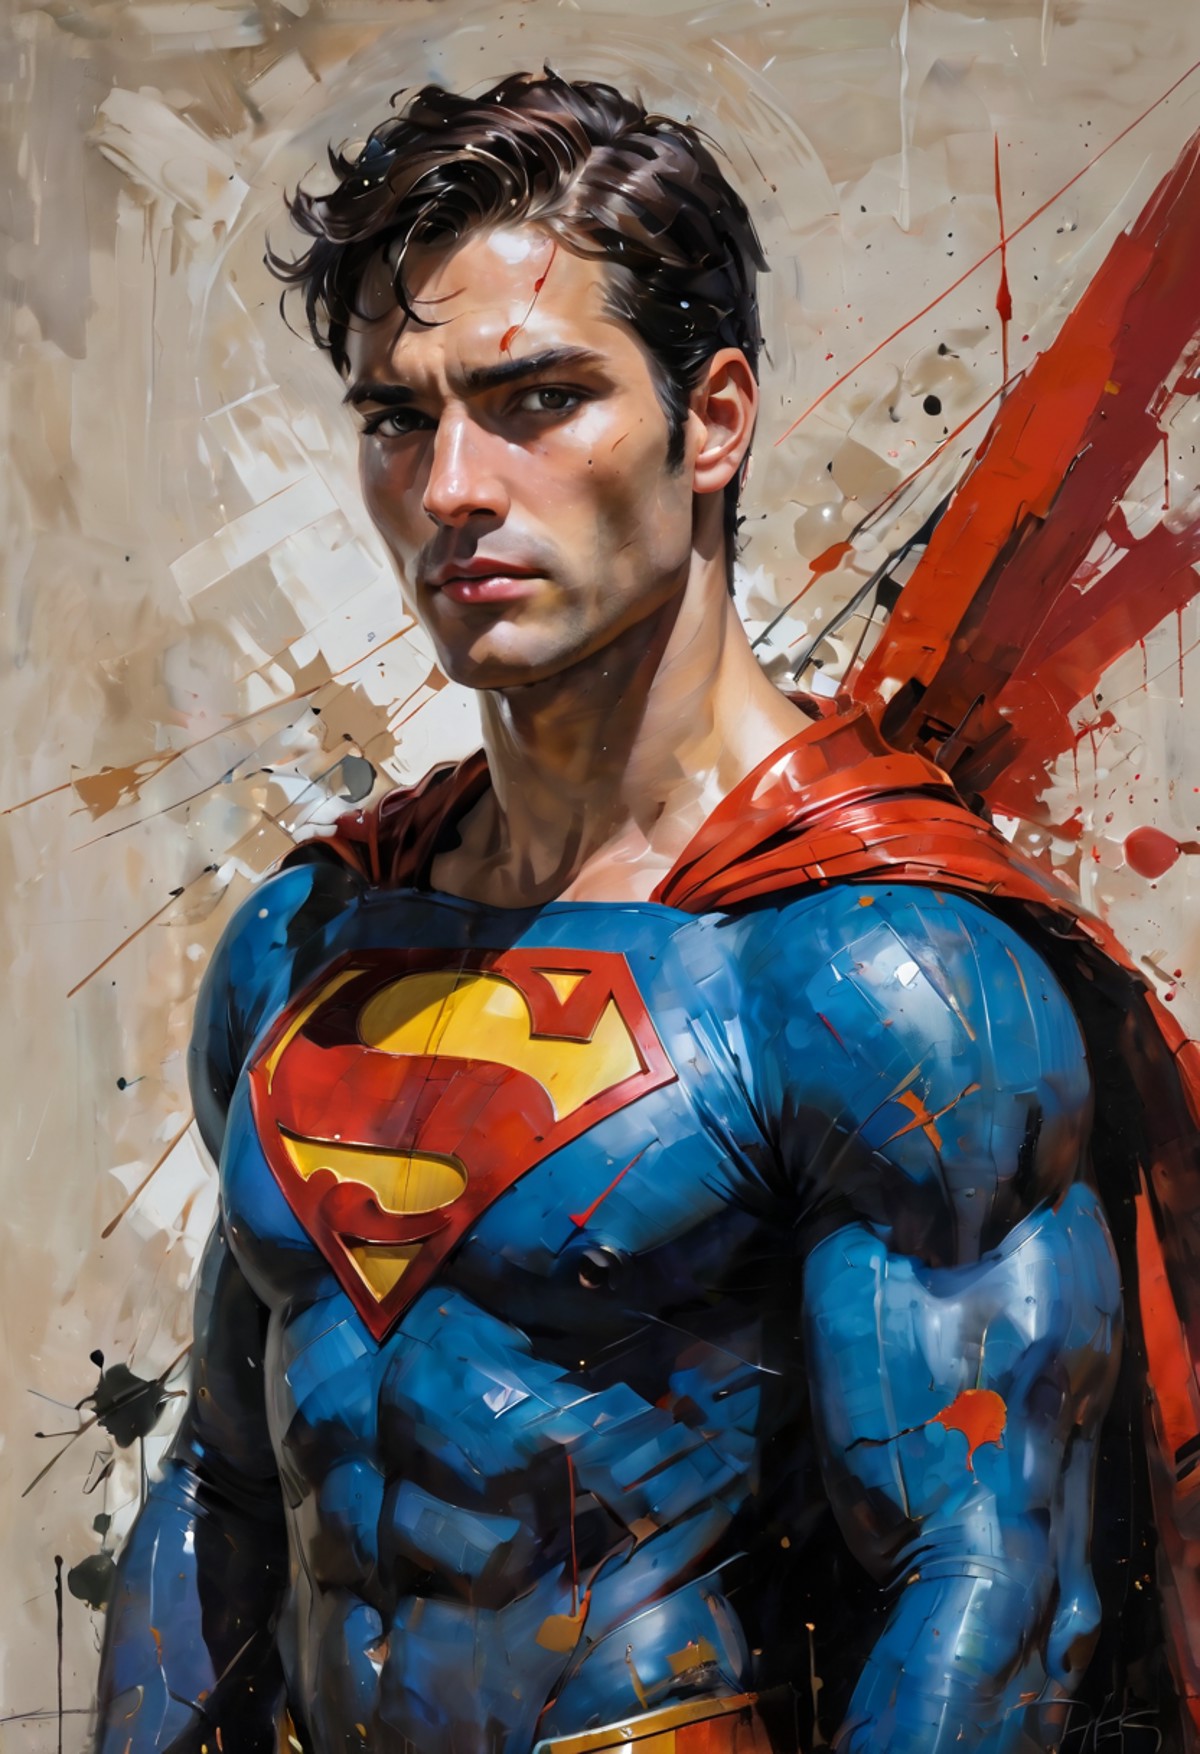 abstract expressionist painting Contemplate the larger-than-life persona of Superman as envisioned through the provocative...